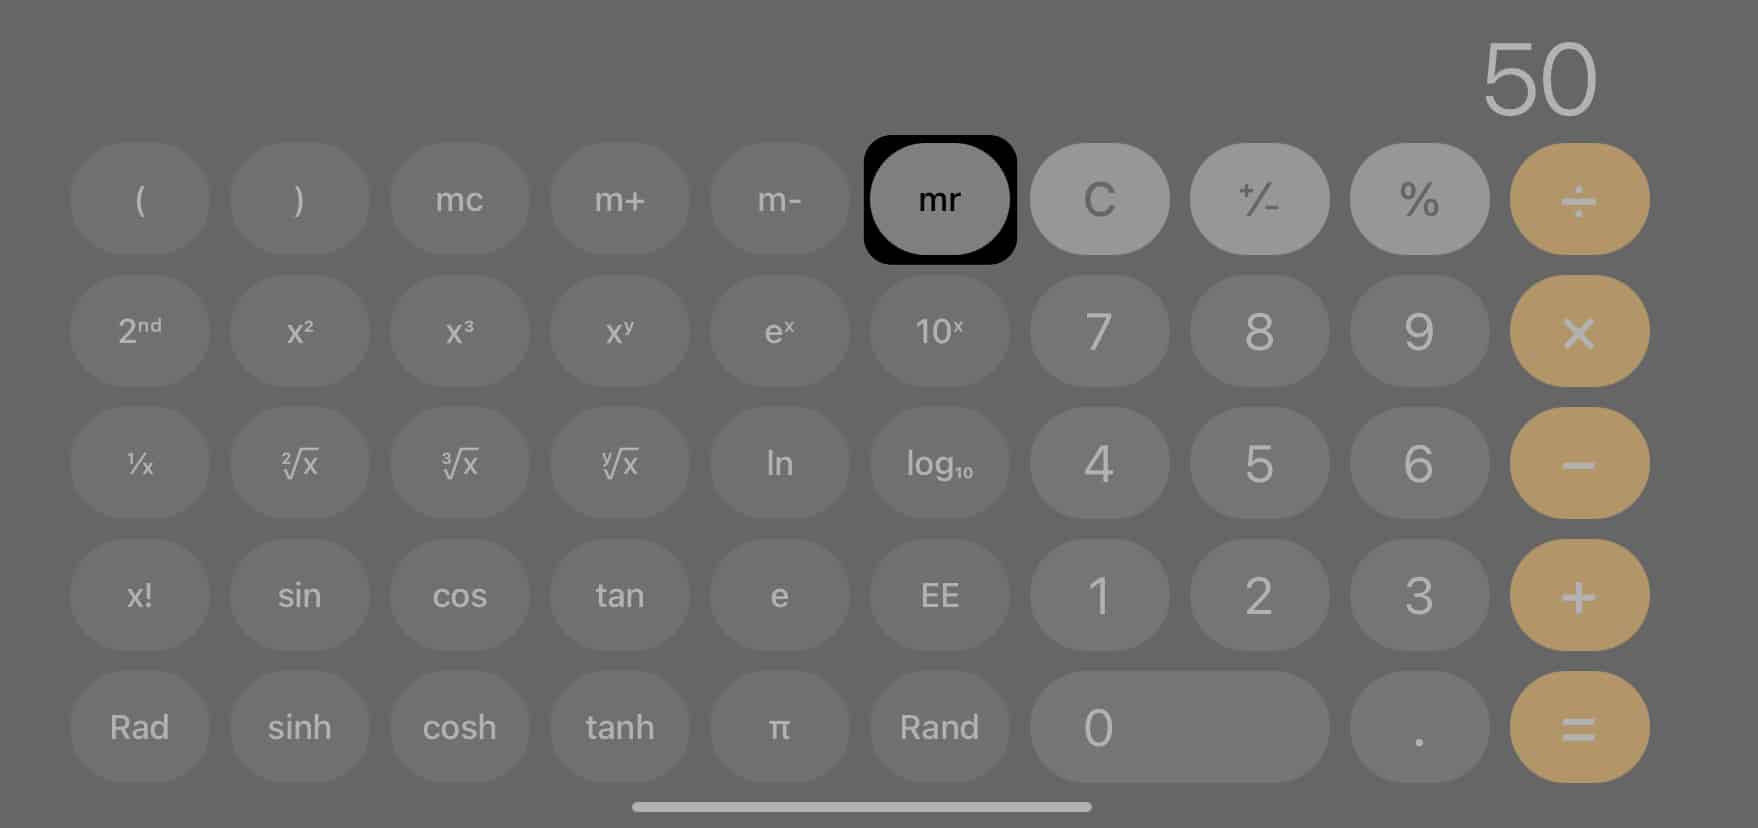 tap mr button to see iphone calculator history